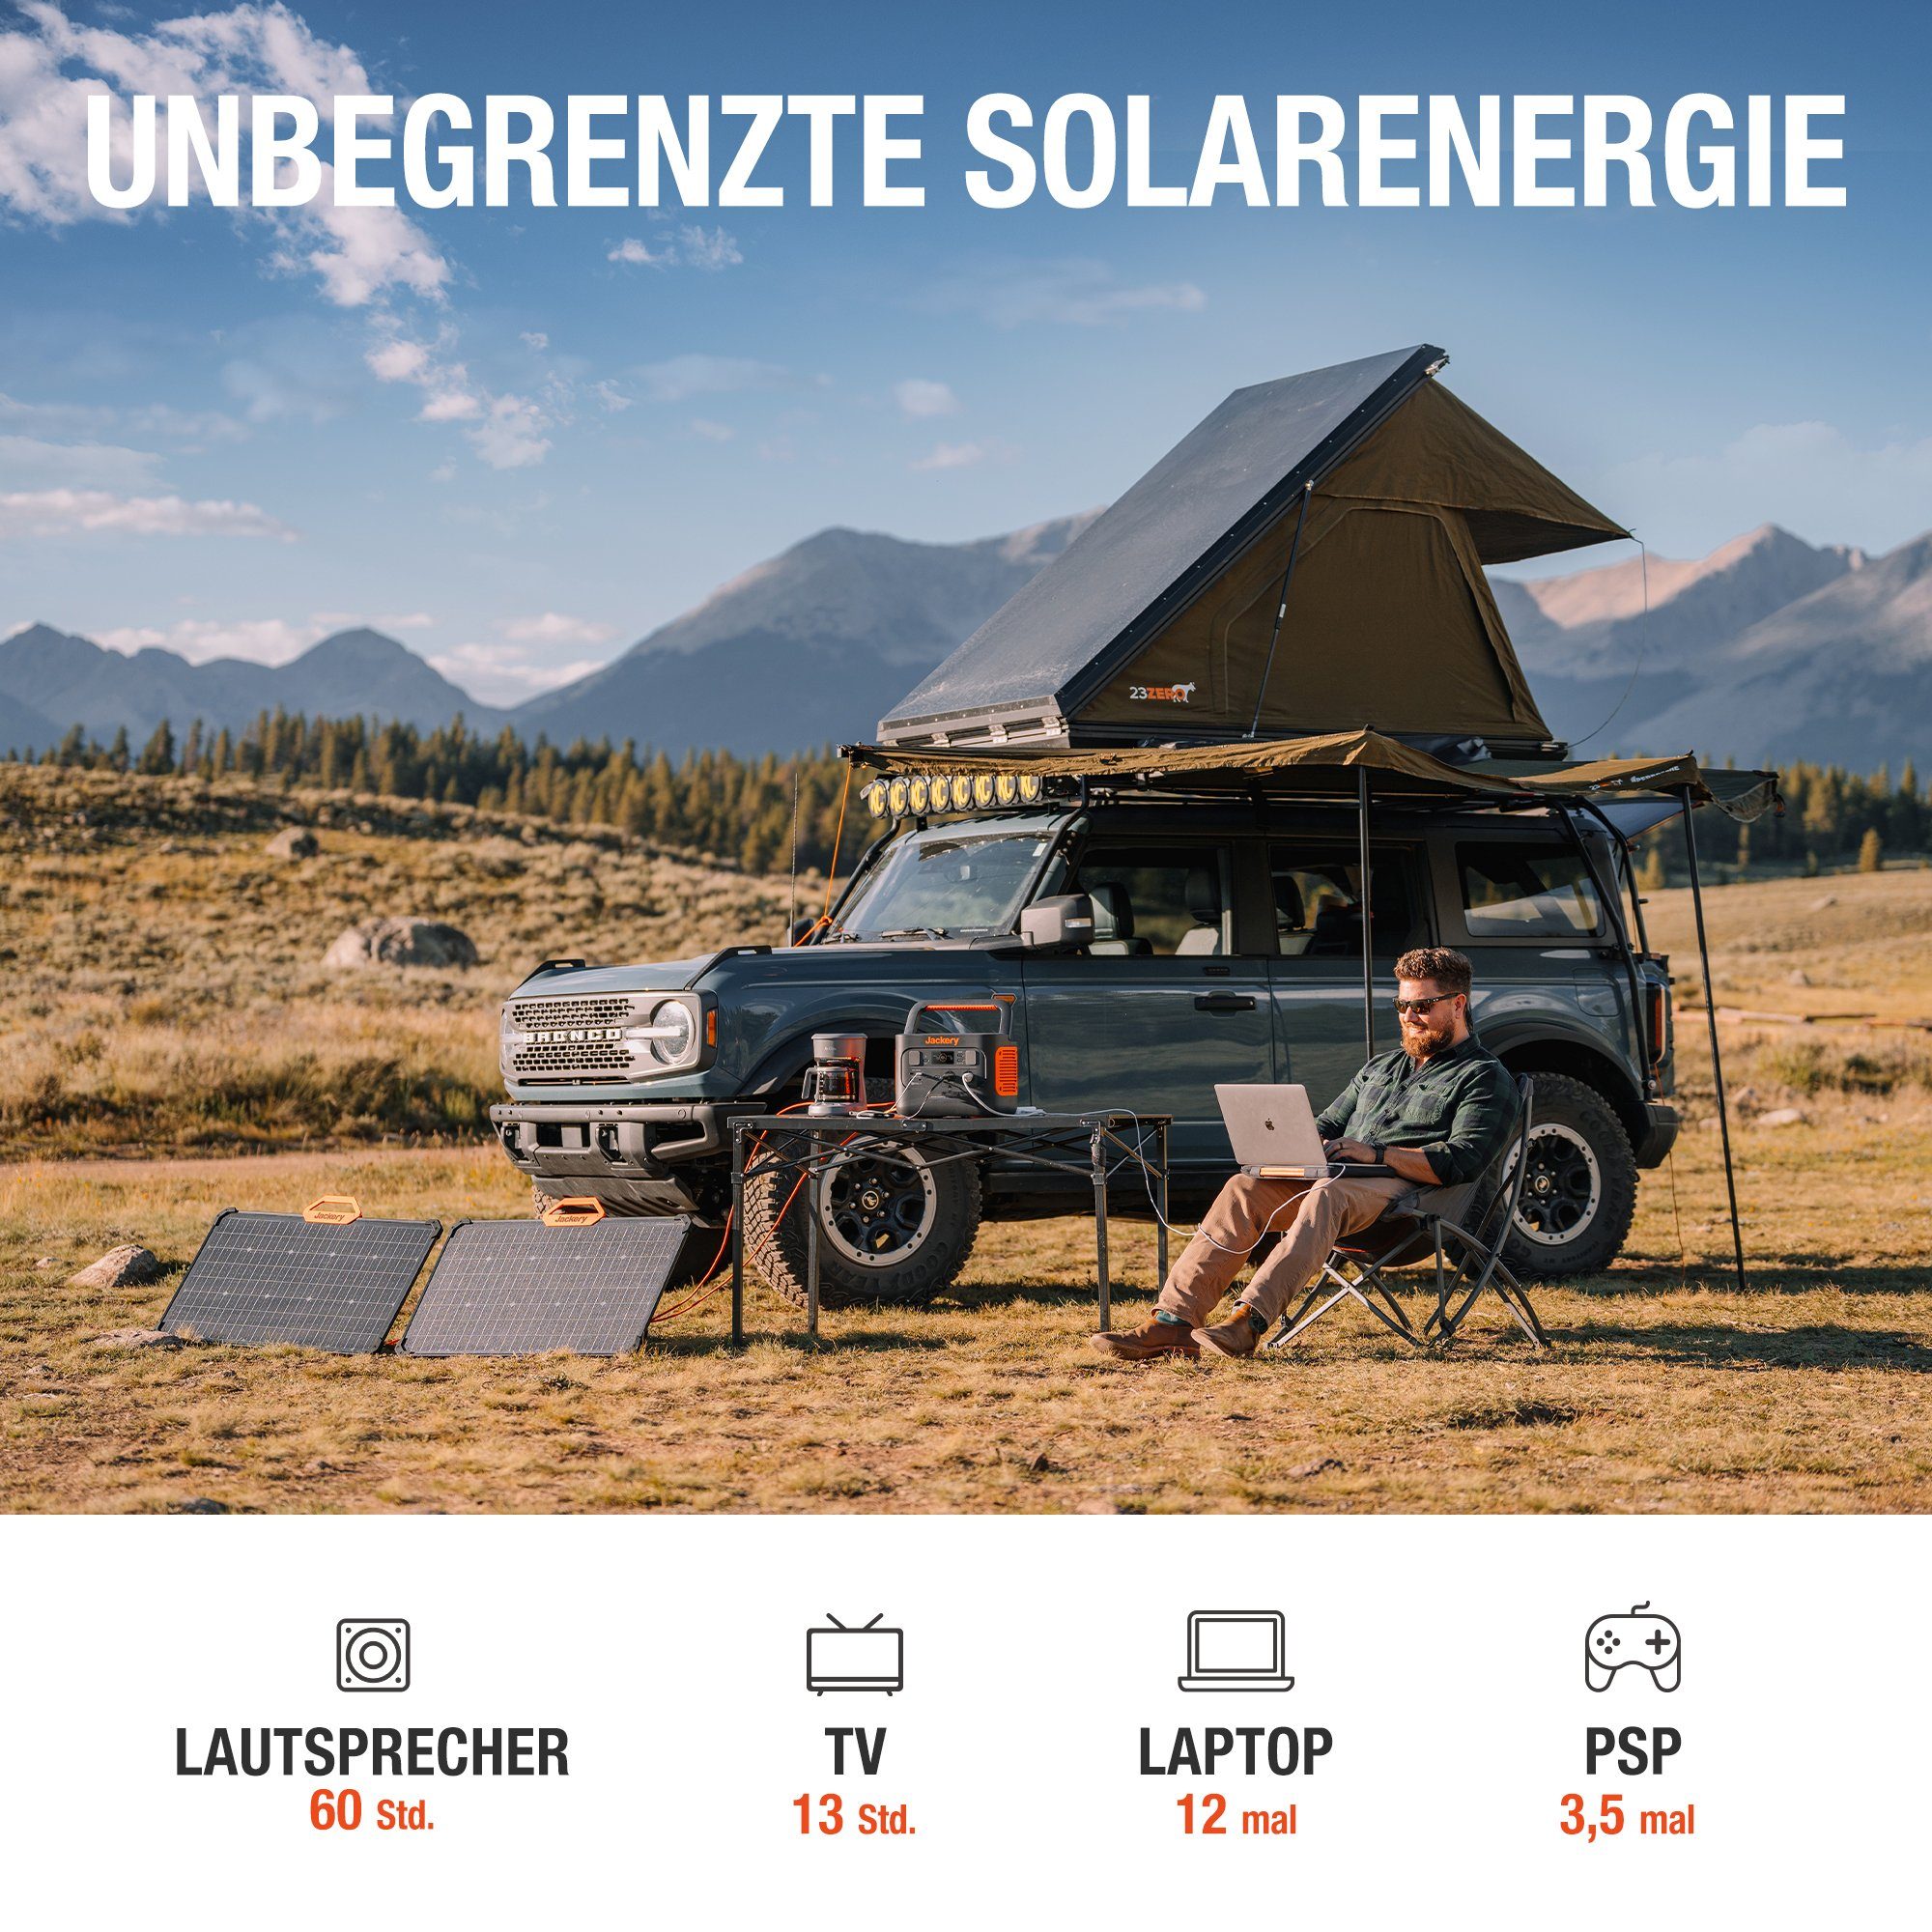 Solarpanel), Outdoor 160W Notfälle Camping Pro, (3-tlg., Generator kW, Stromgenerator Solarpanel, 2,00 Solar mit tragbare 1000 2x80W 1002 Wh Powerstation für Jackery 1000Pro mit Solargenerator in